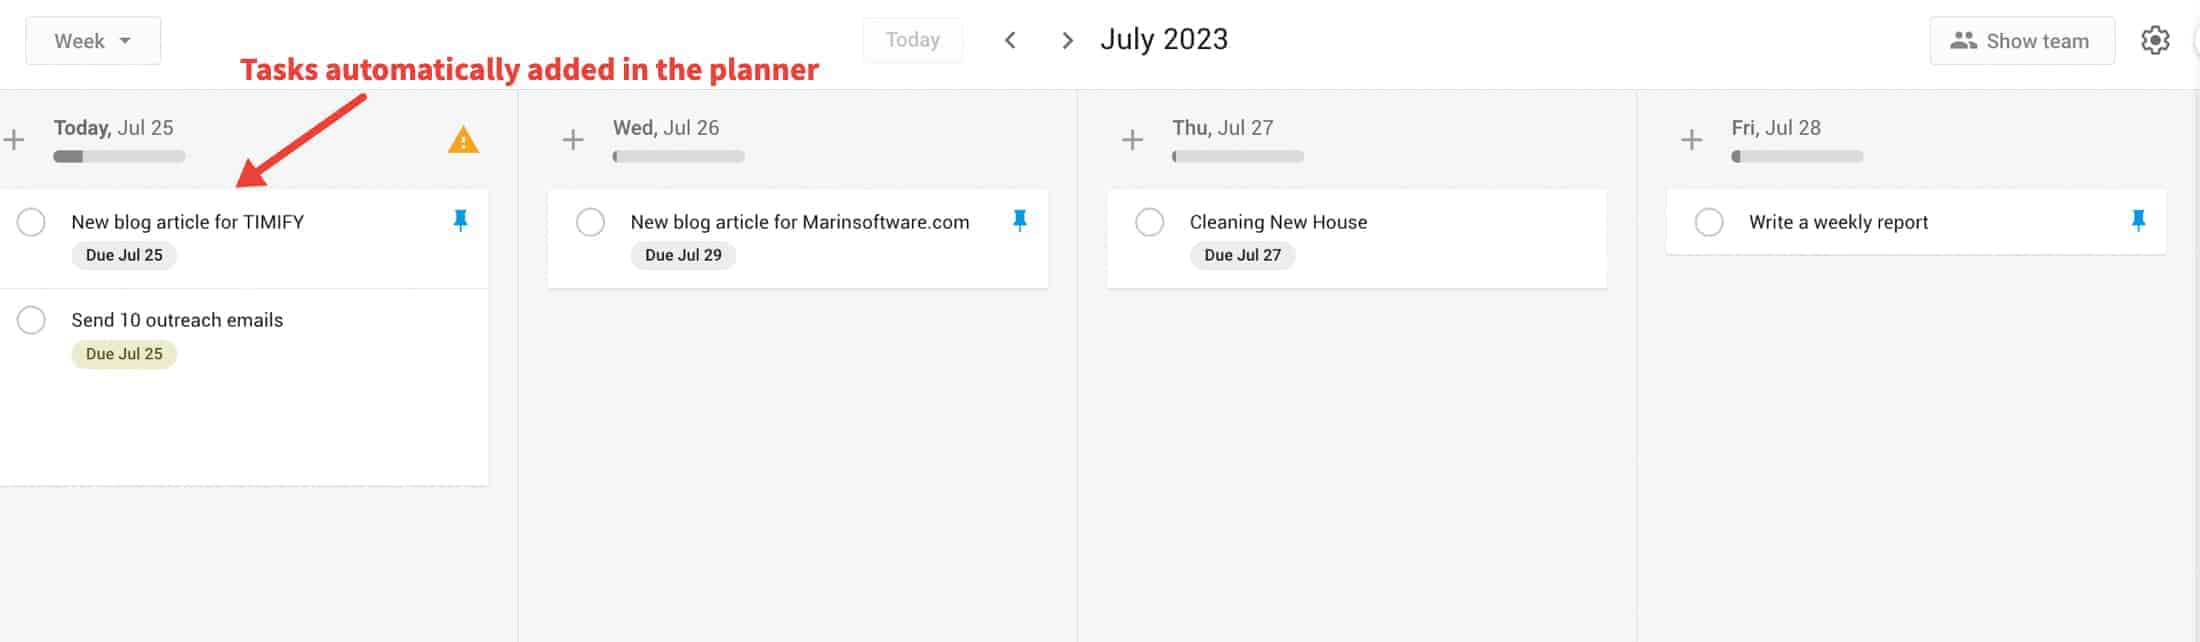 Tasks automatically added in the planner in TimeHero